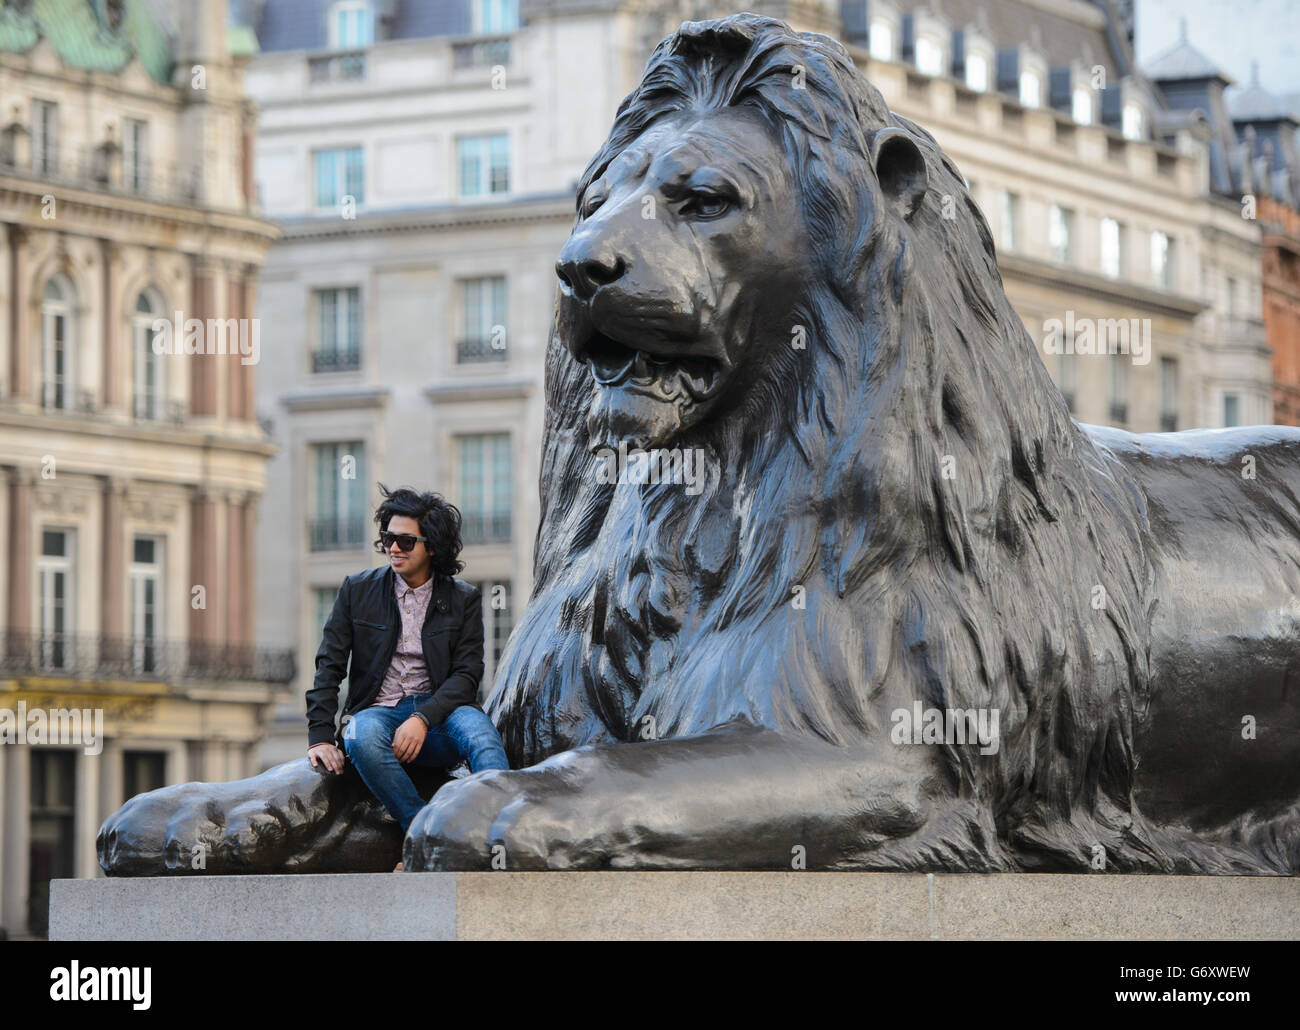 A man sits on one of the lion statues in Trafalgar Square, in central London. PRESS ASSOCIATION Photo. Picture date: Saturday March 22, 2014. Photo credit should read: Dominic Lipinski/PA Wire Stock Photo